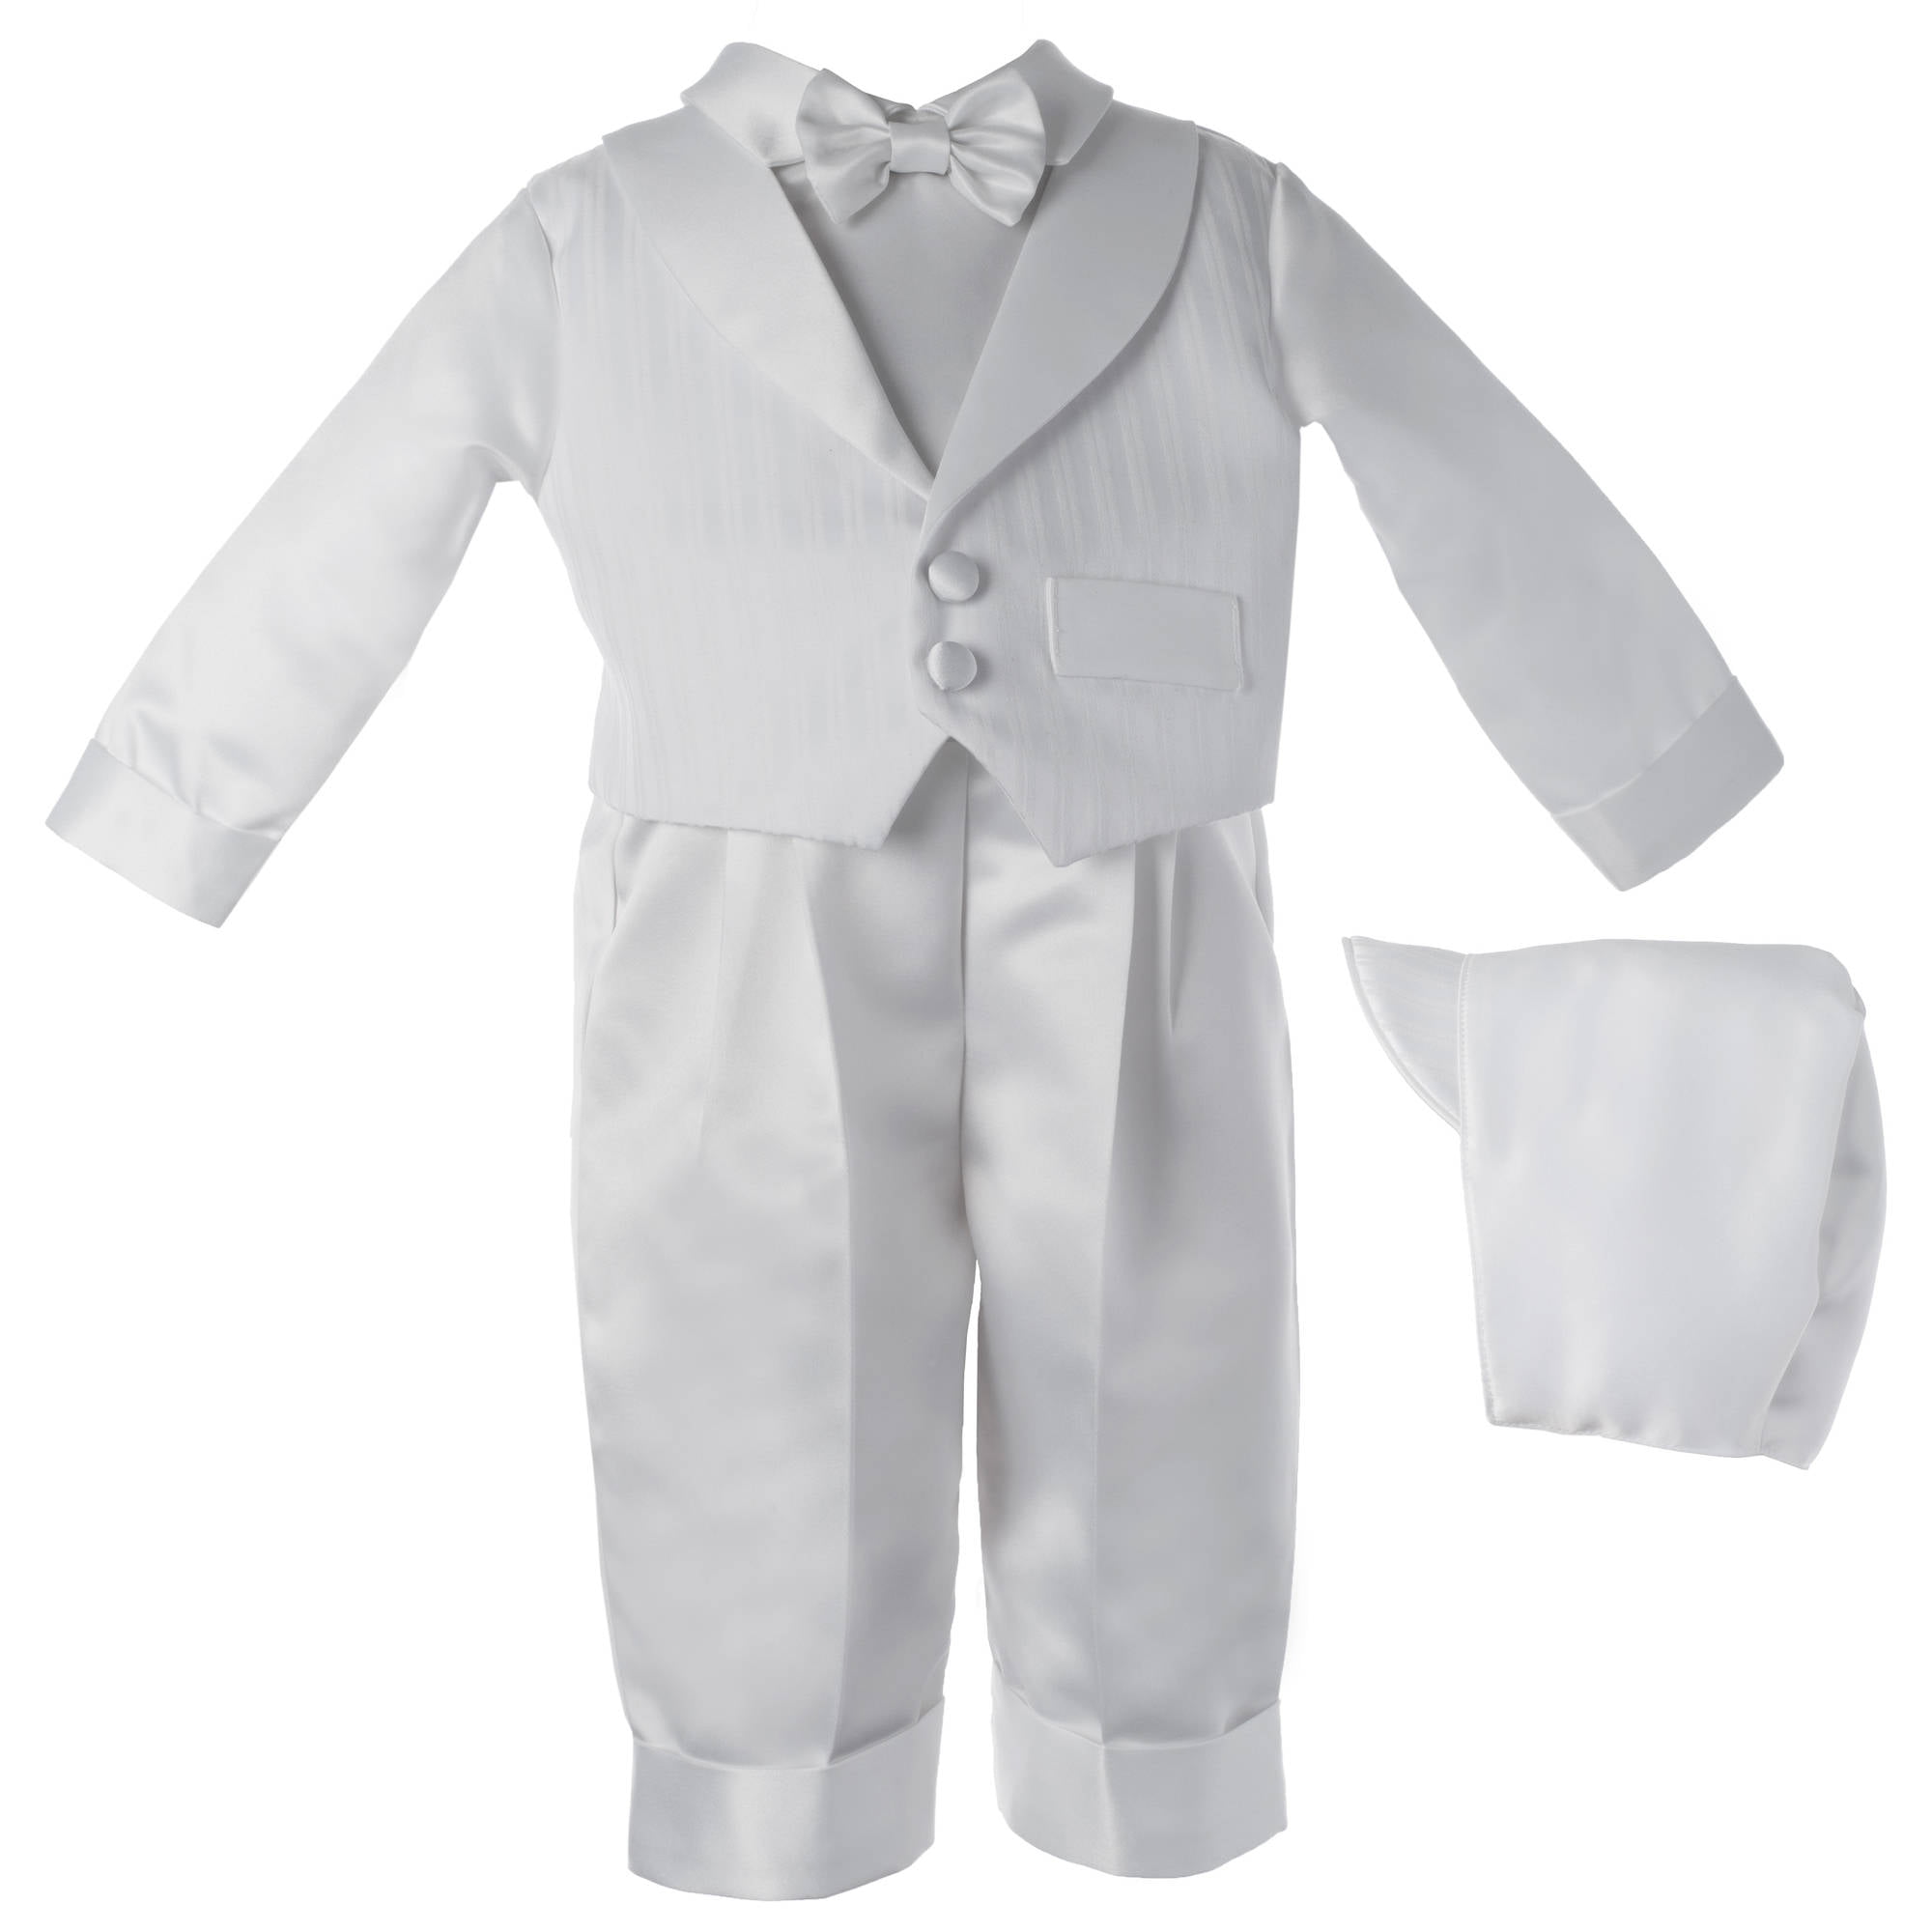 baptism outfit for 4 year old boy